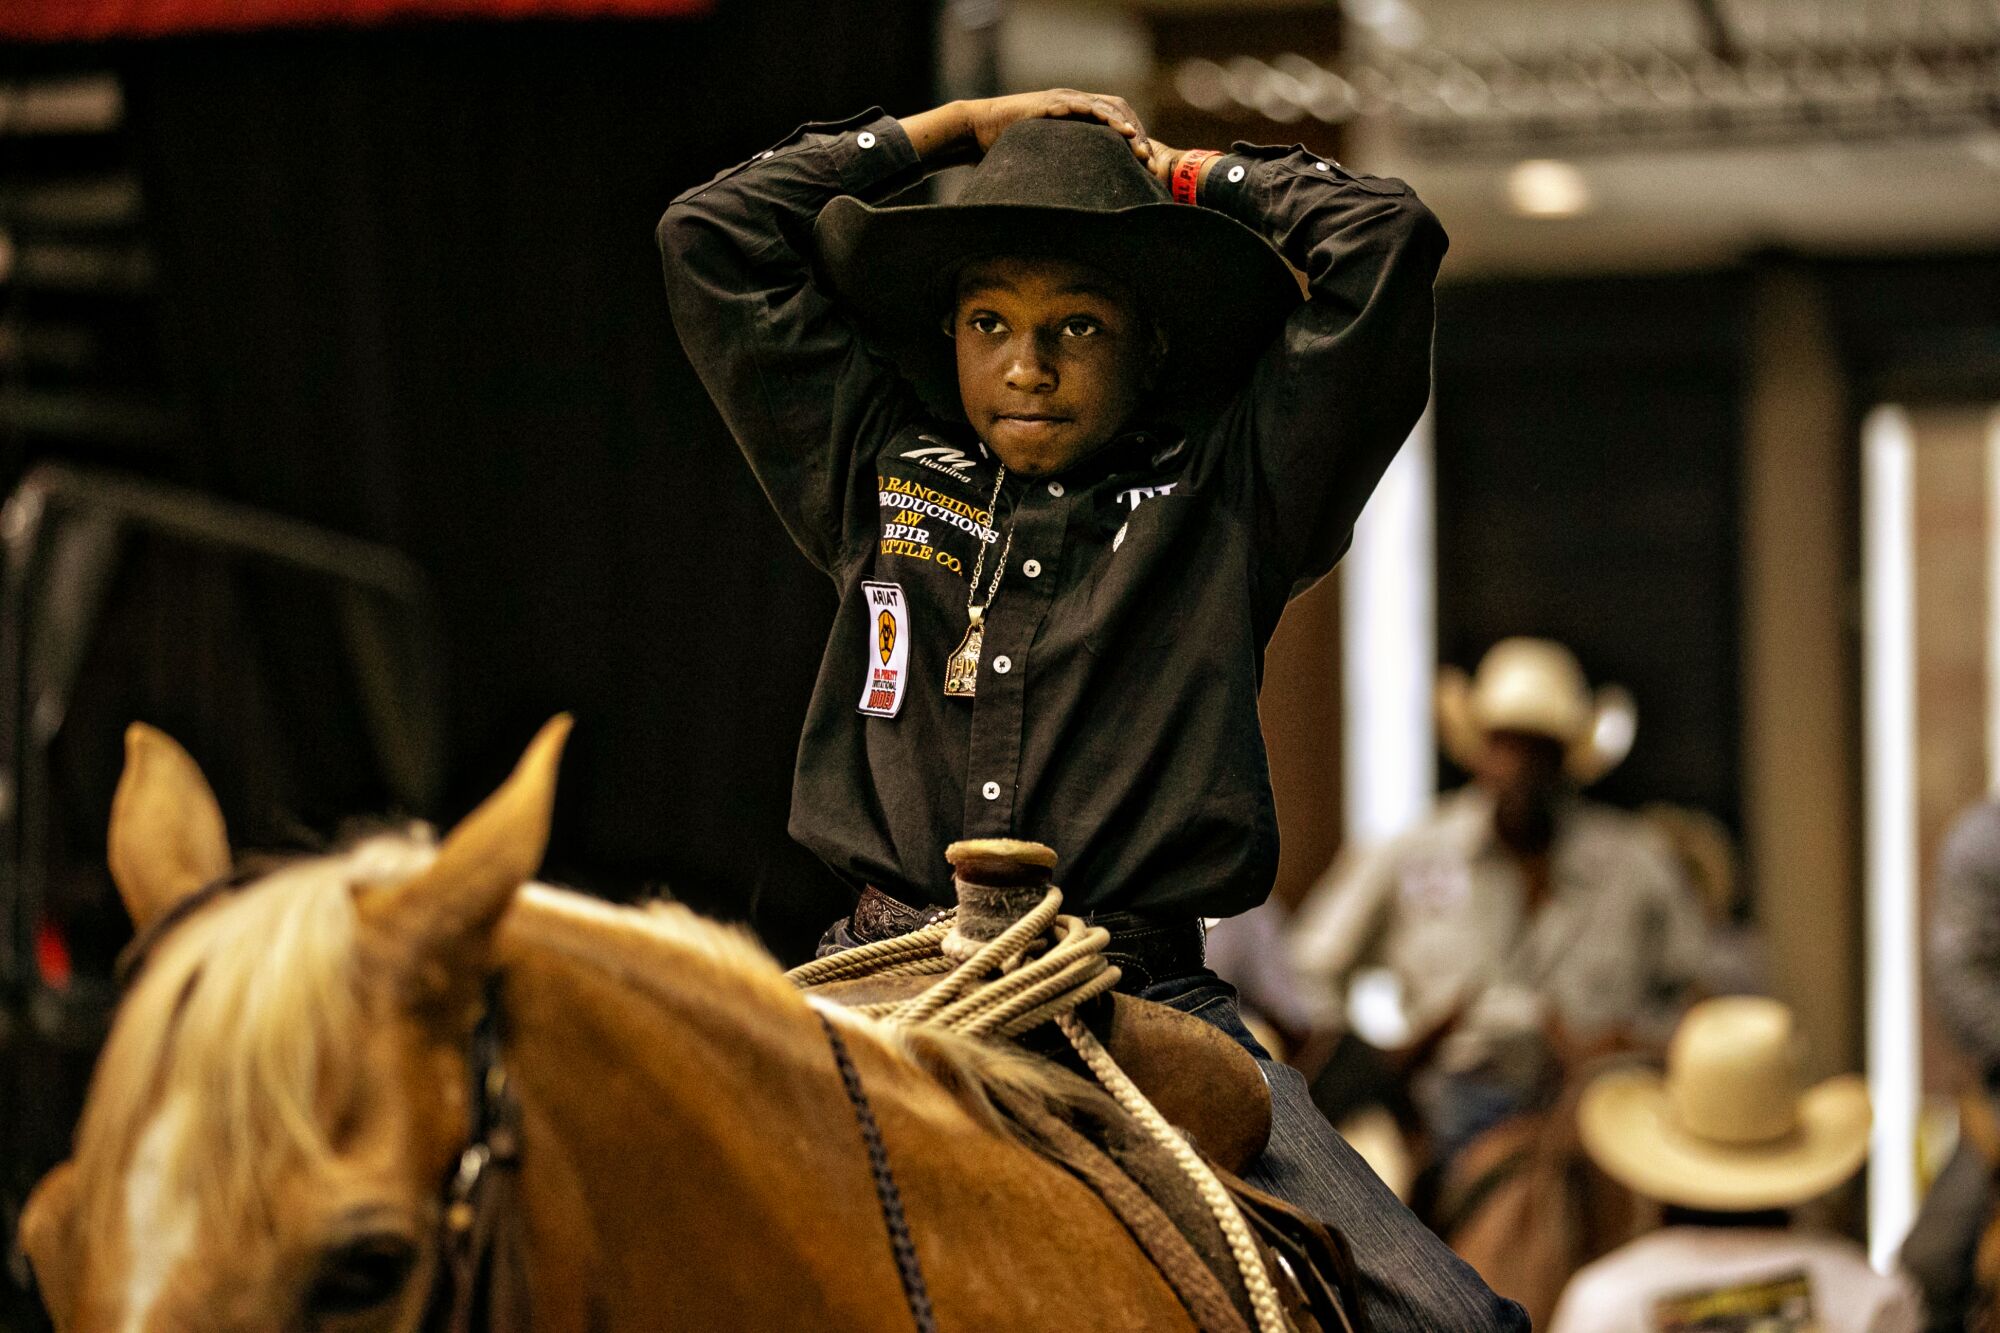 A boy sitting on his horse with his hands on his cowboy hat